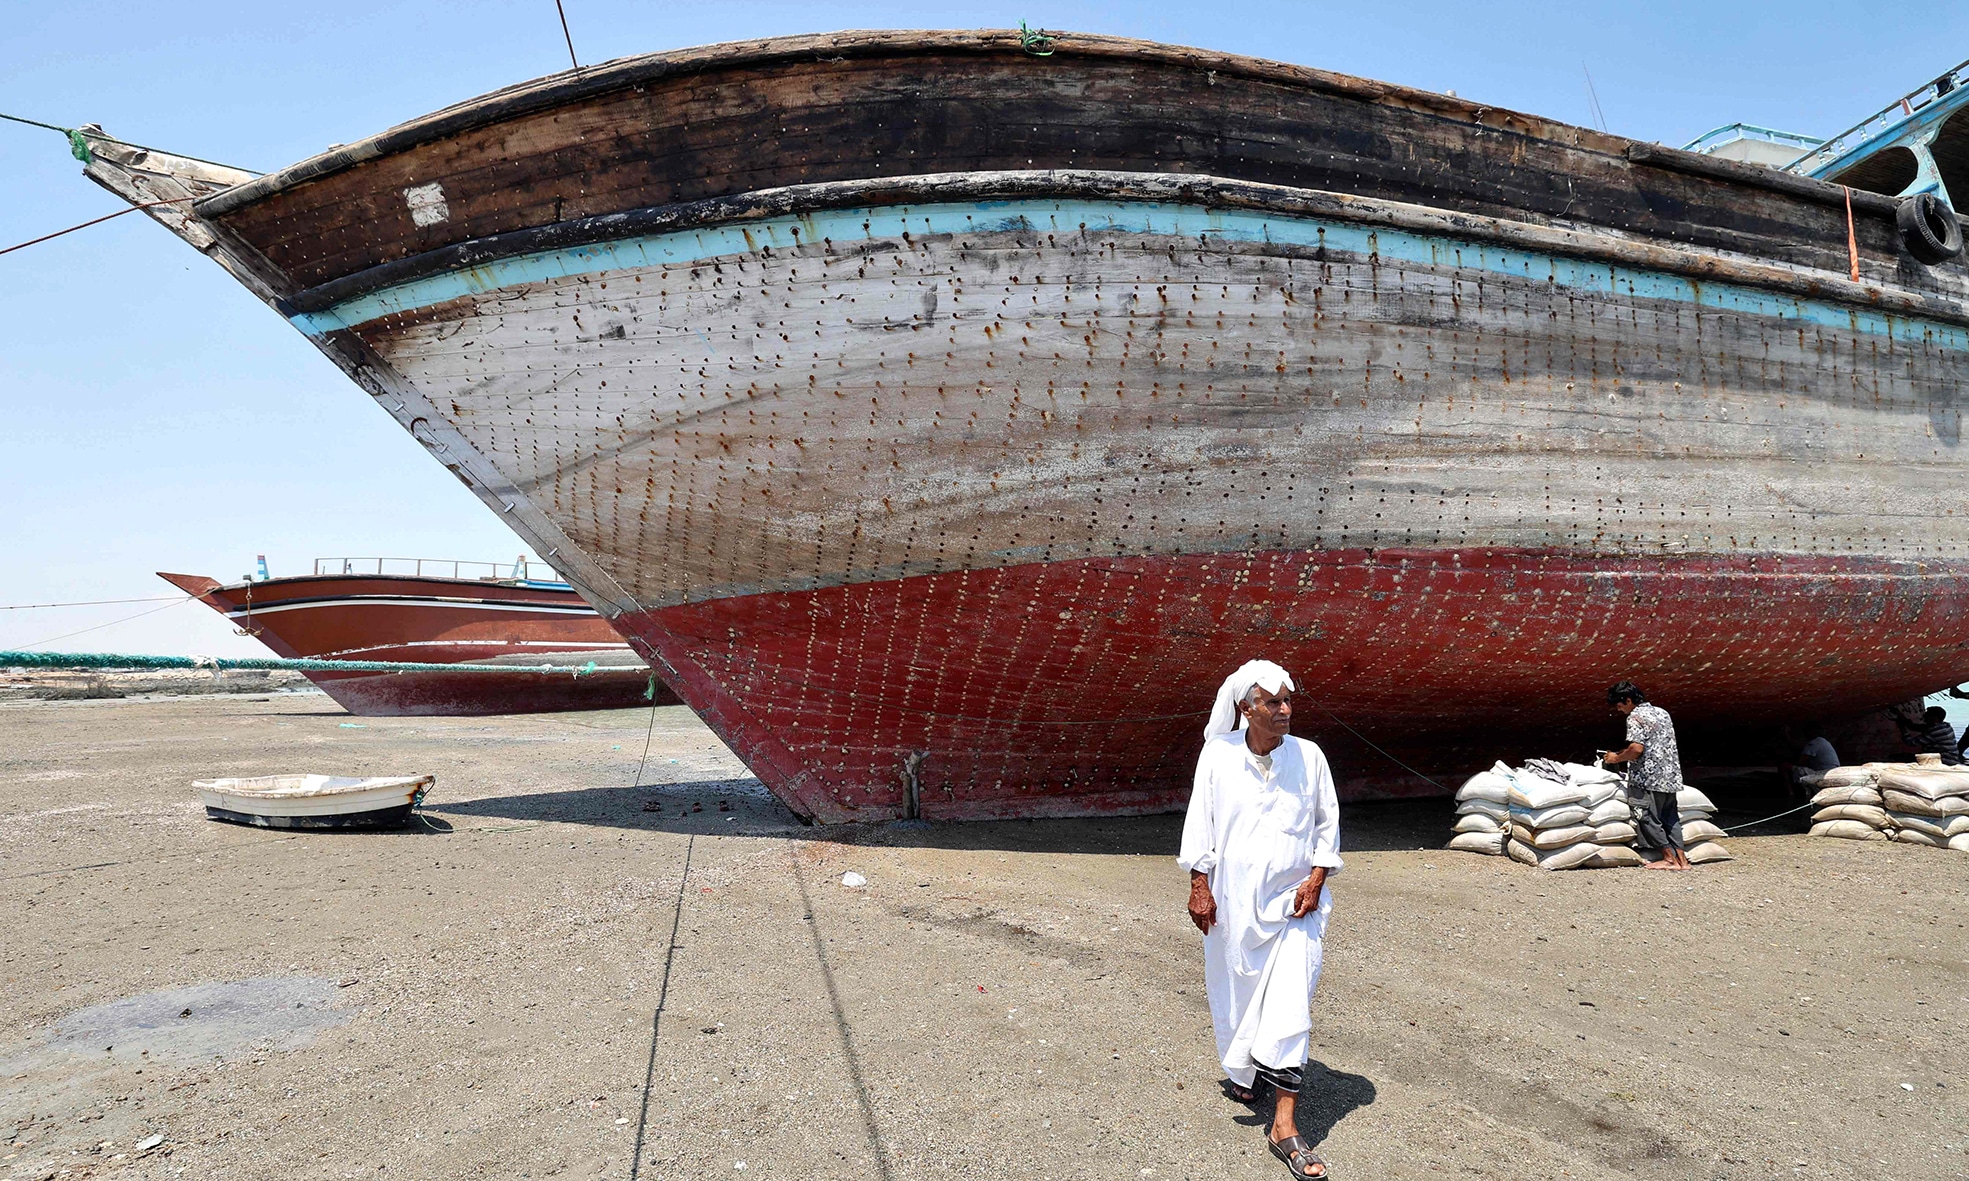 A man walks in front of a traditional wooden ships (lenj).